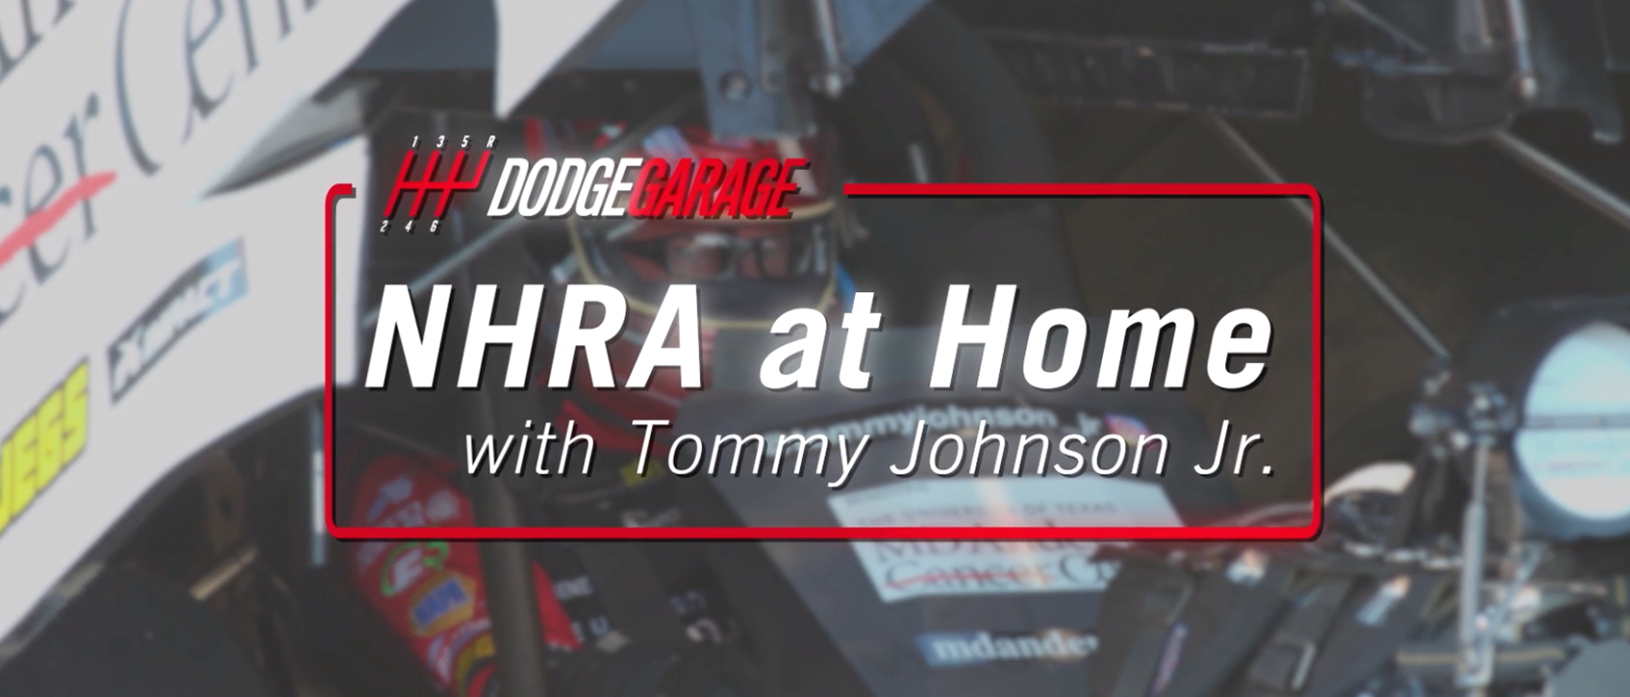 NHRA at Home with Tommy Johnson Jr. – Home Projects